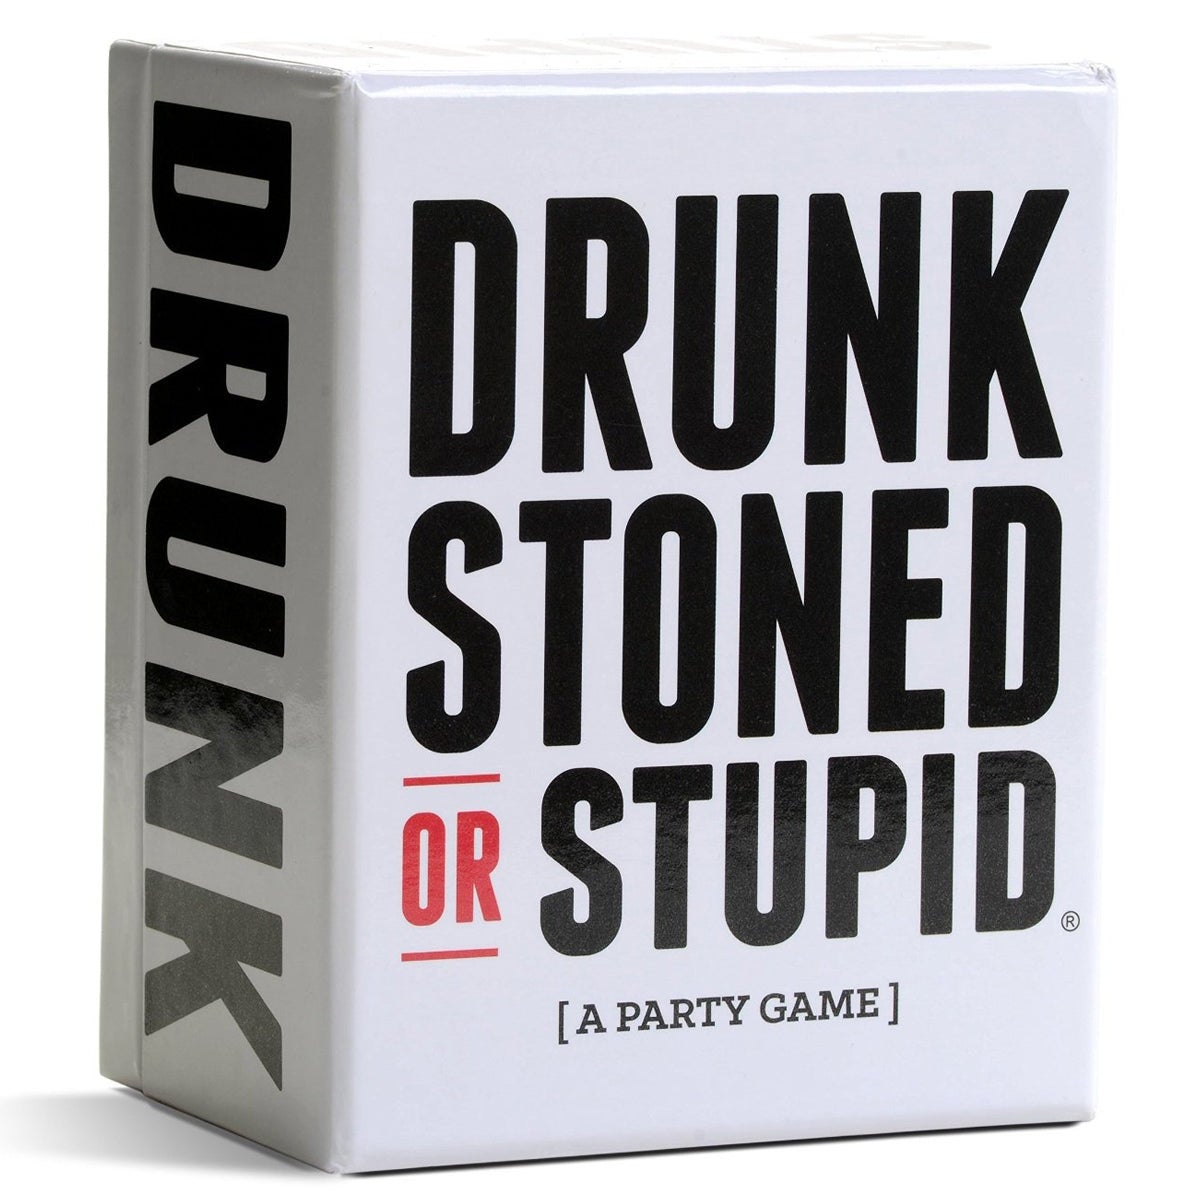 Drunk Stoned Or Stupid